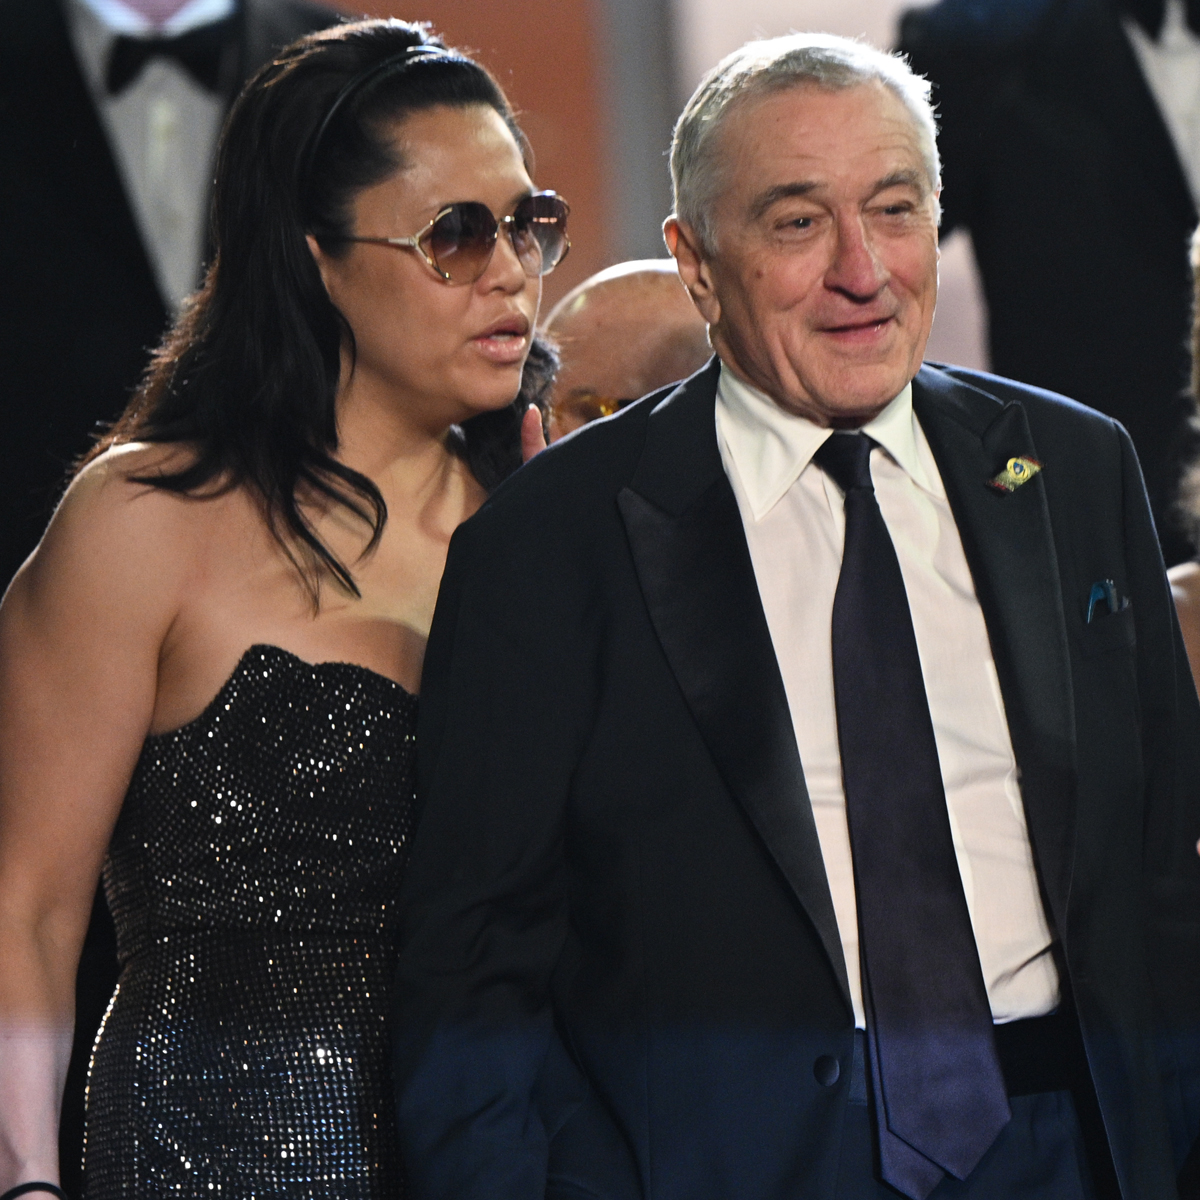 Robert De Niro and Tiffany Chen Double Date With Sting and Wife Trudie